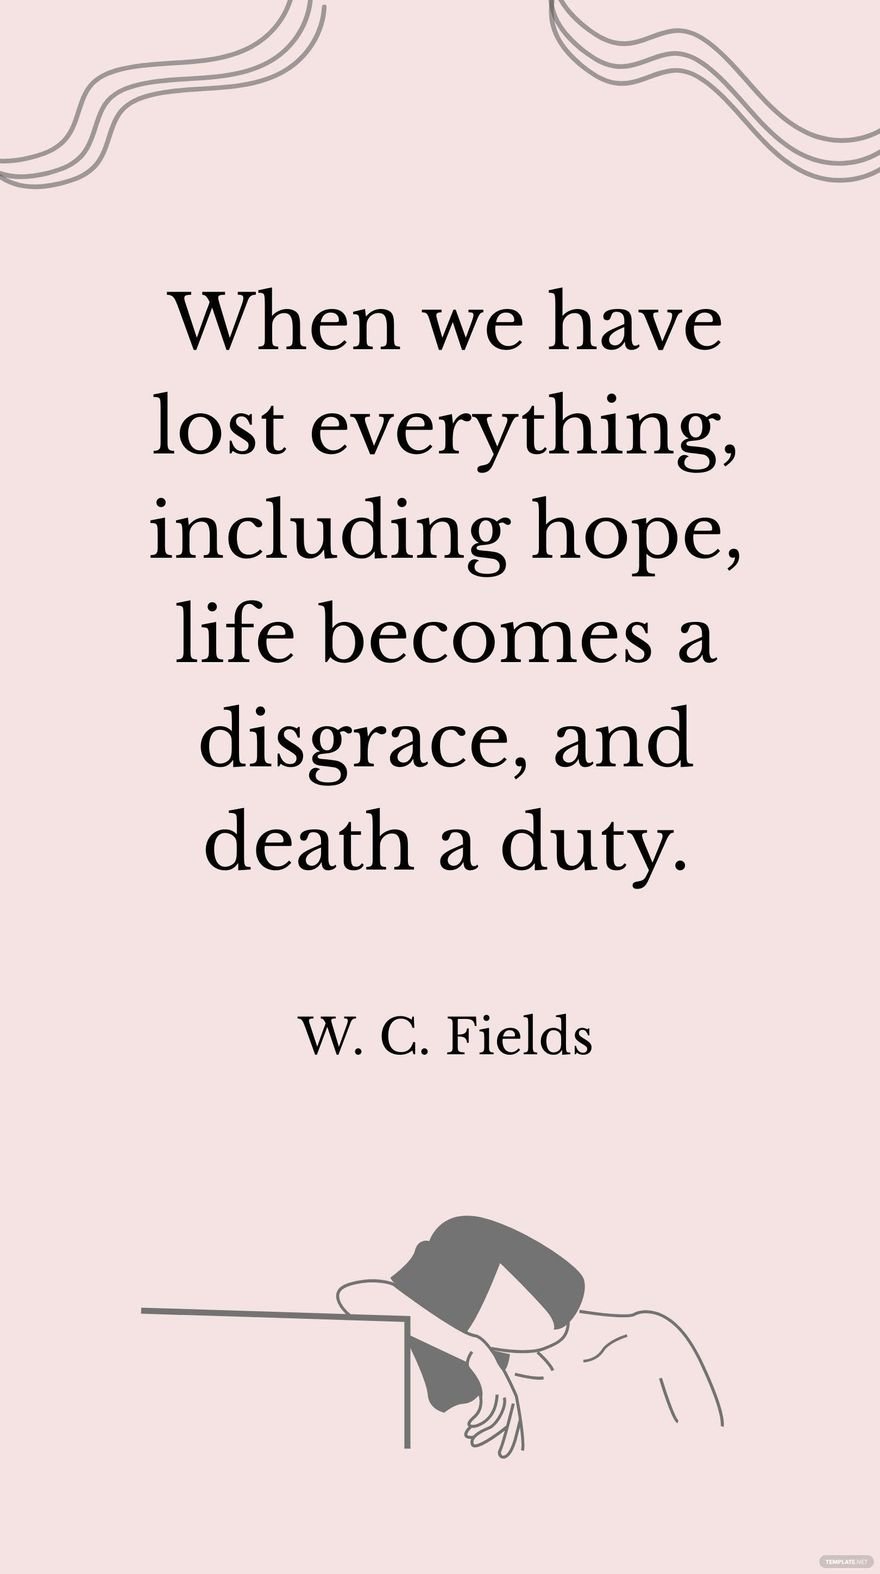 W. C. Fields - When we have lost everything, including hope, life becomes a disgrace, and death a duty.